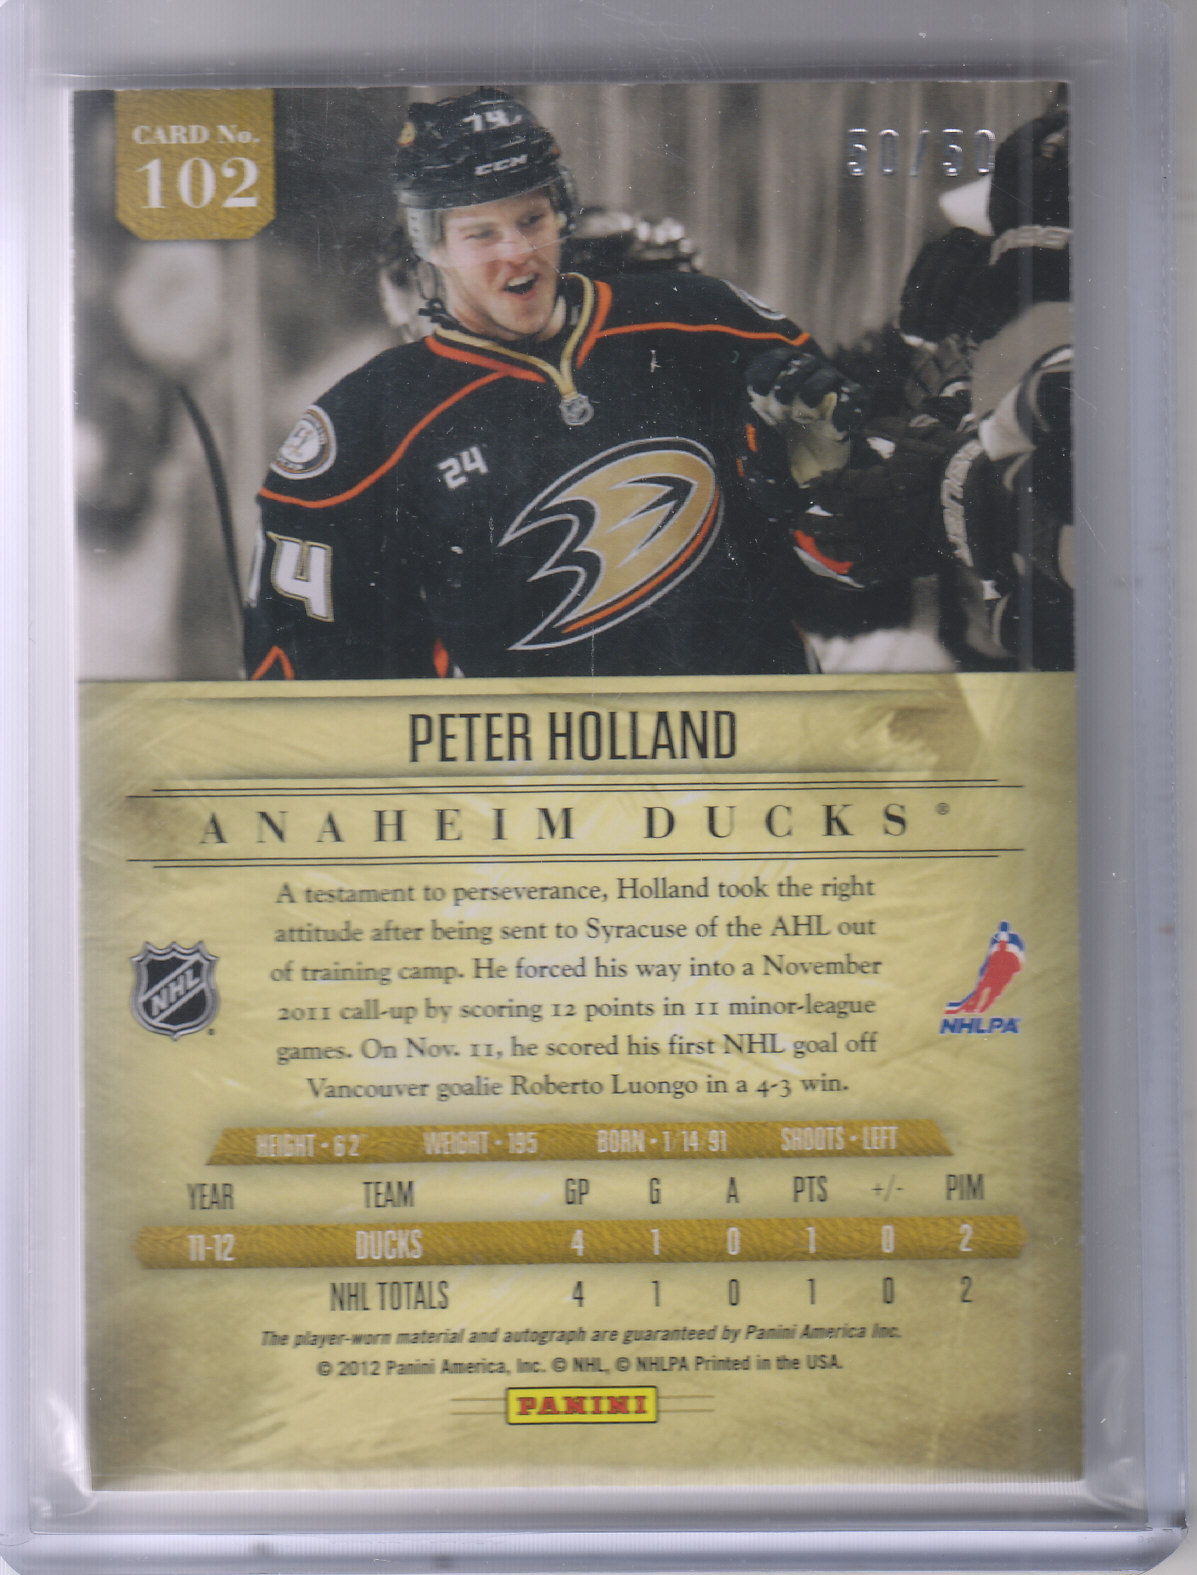 2011-12 Panini Prime Rookies Holosilver Patch Autographs #102 Peter Holland back image